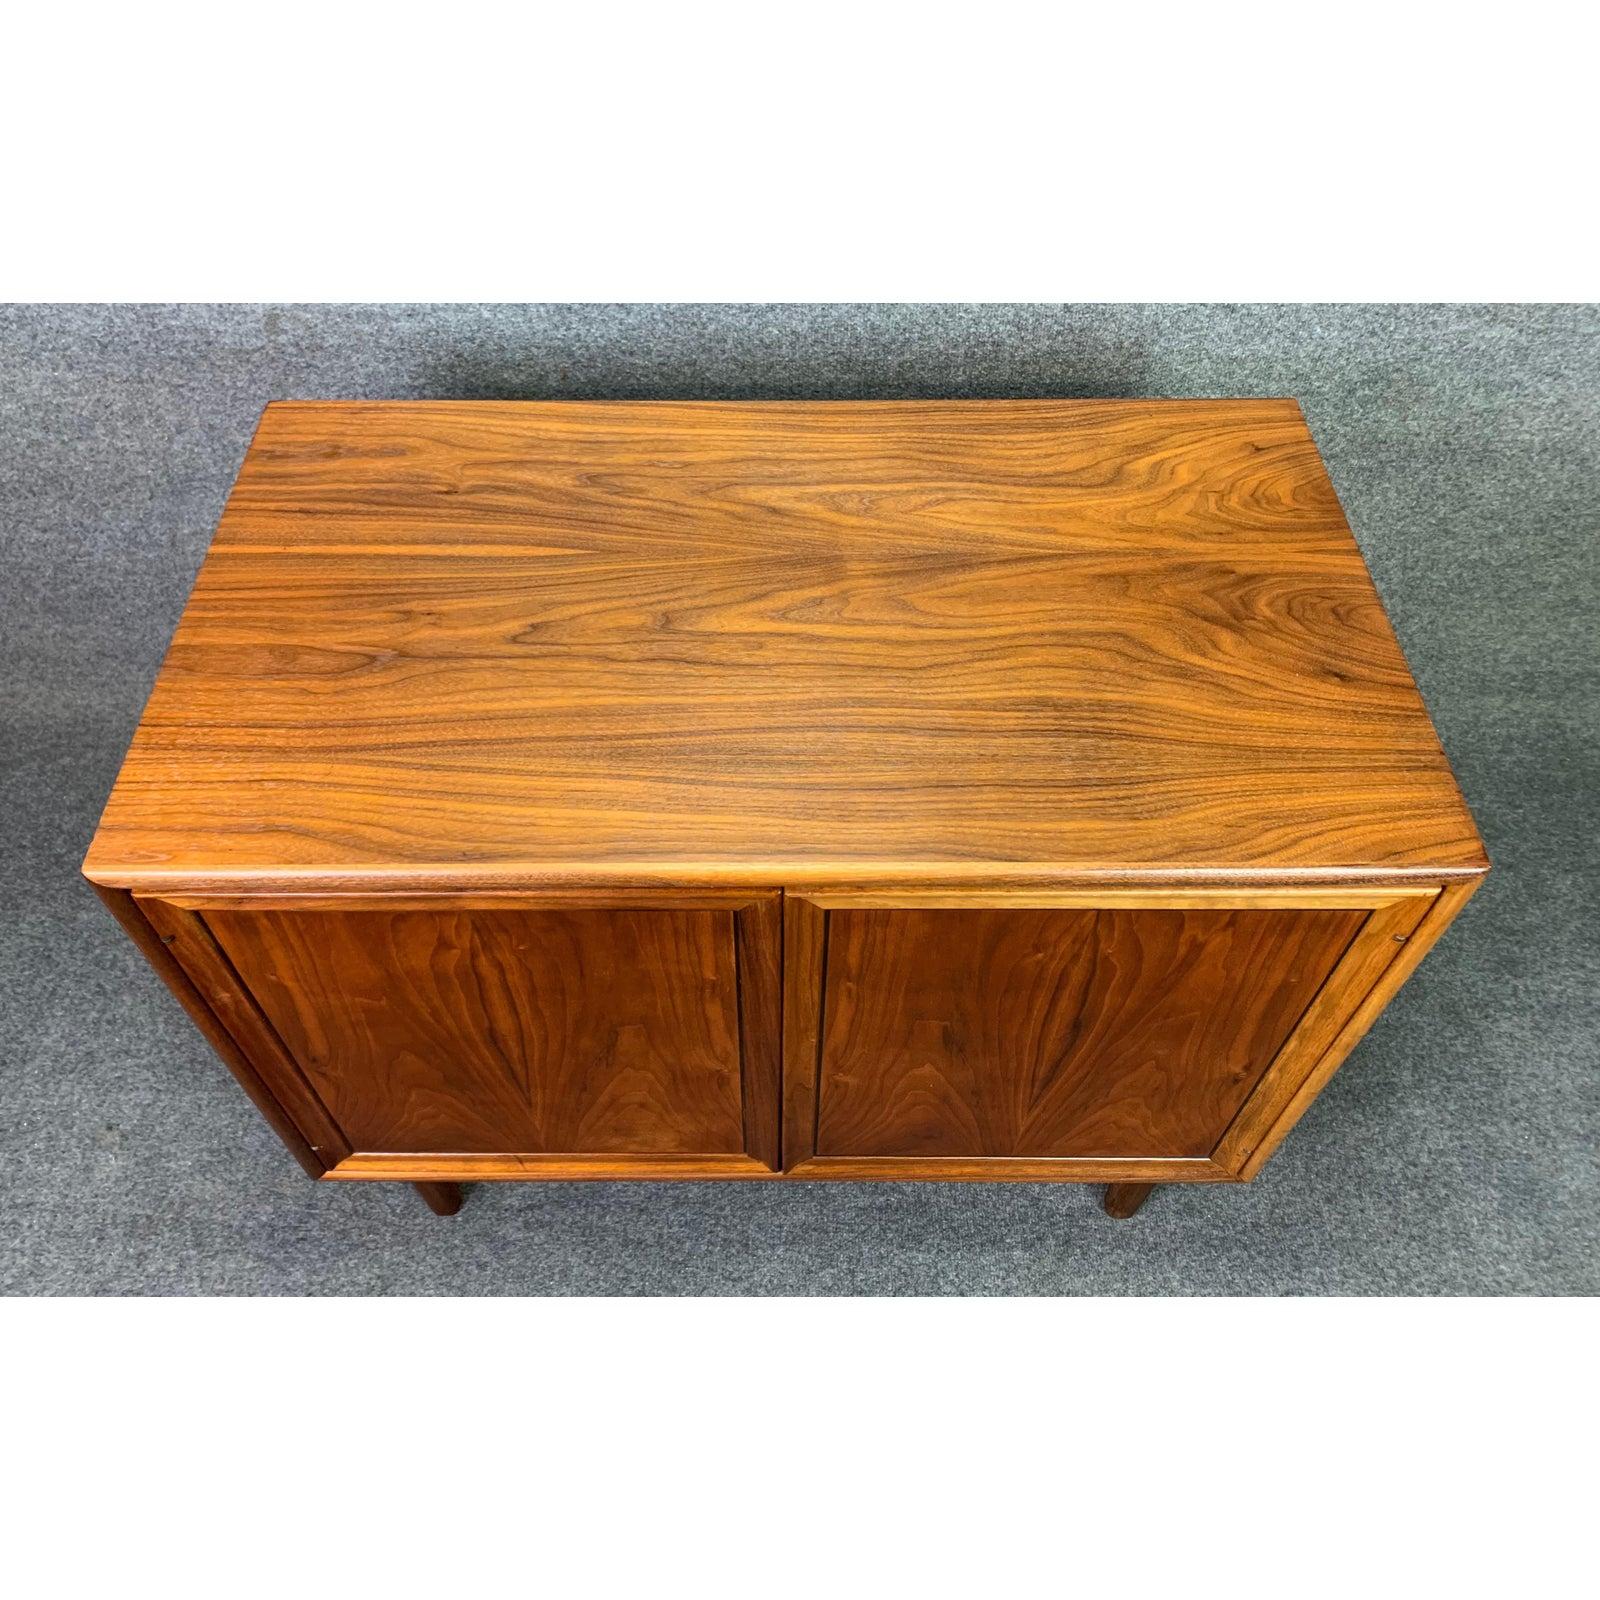 Here is a beautiful MCM cabinet in walnut designed by Kipp Stewart and Stewart McDougall for the sought after 